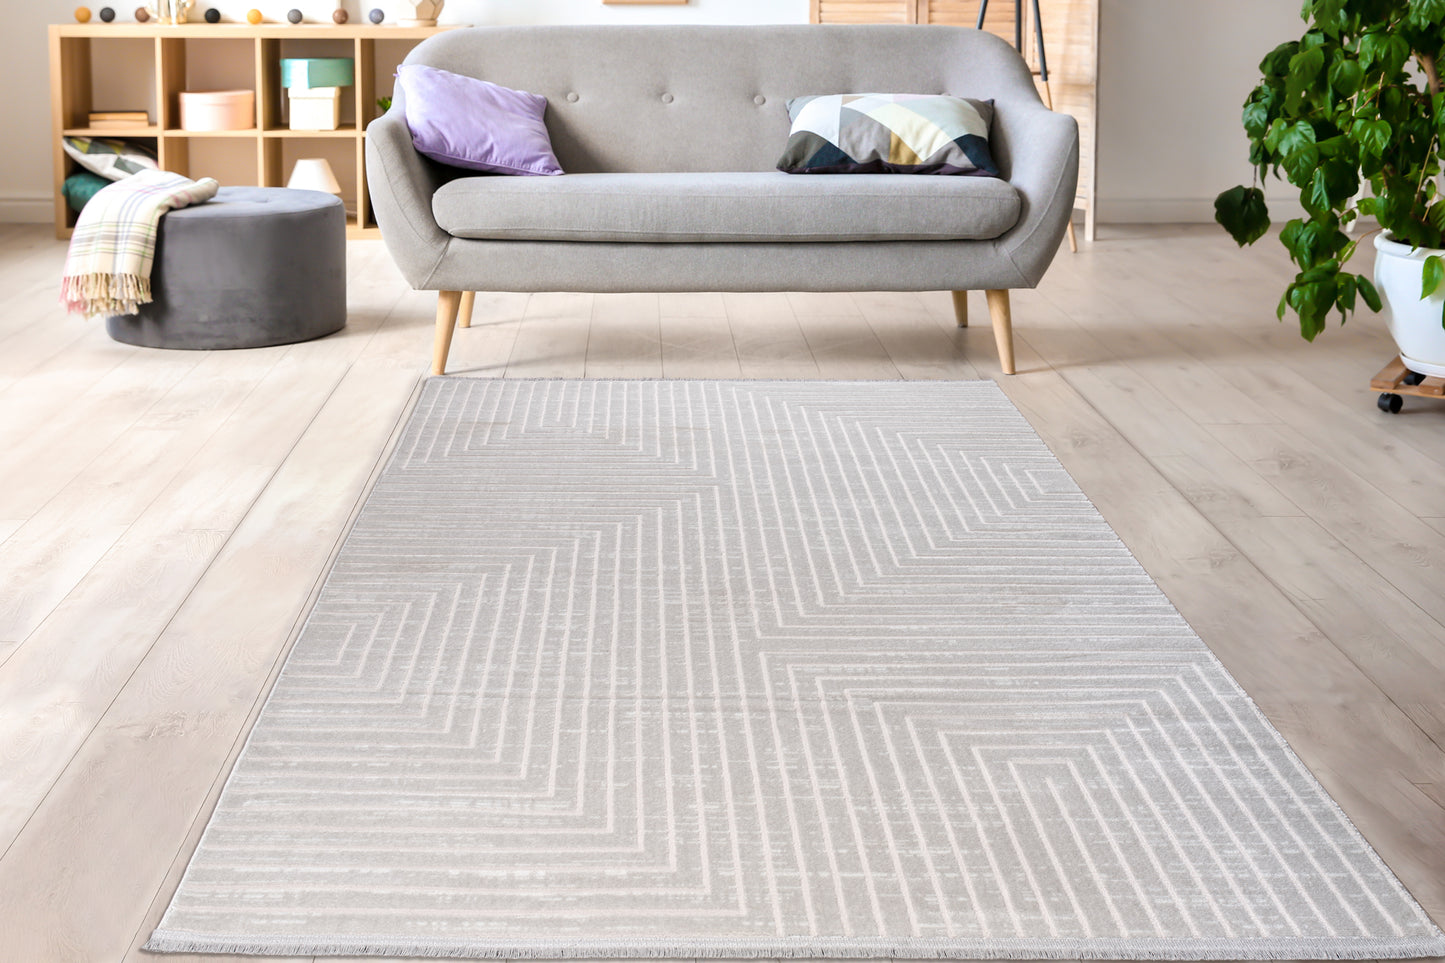 ladole rugs geometric pattern home decor indoor area rug amazing premium carpet for living room bedroom dining room kitchen and office grey 2x5, 3x5 Runner Rug, Entry Way, Entrance, Balcony, Bedside, Home Office, Table Top